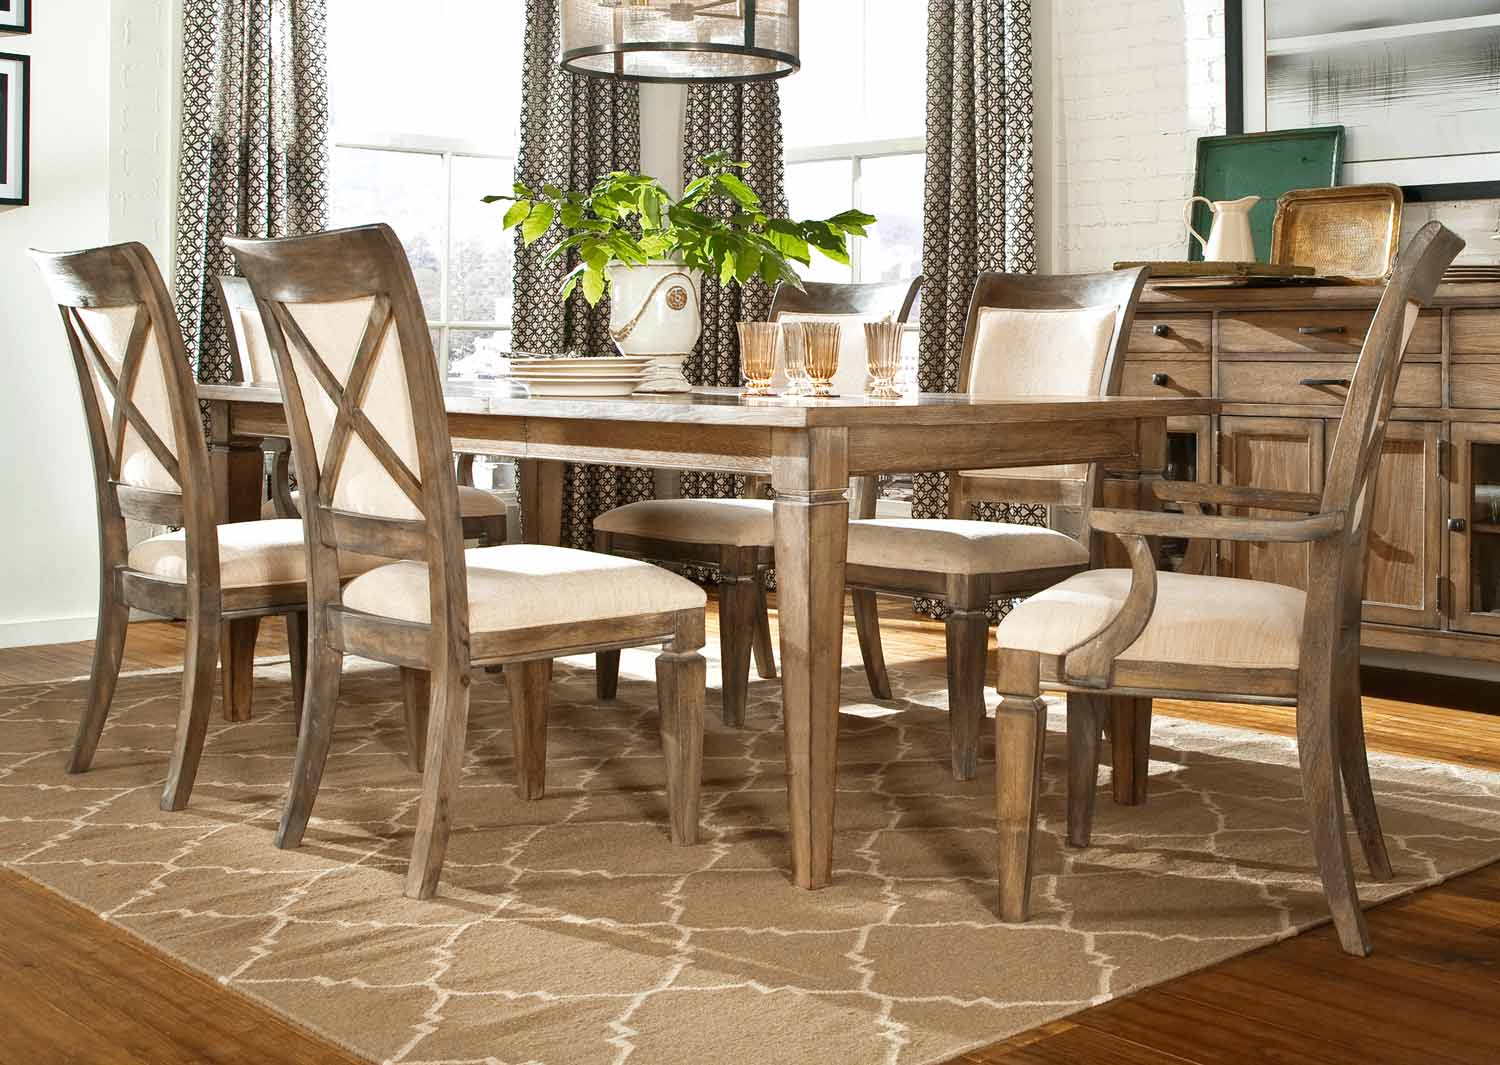 Legacy Classic Brownstone Village Dining Set with Leg Table- Aged Patina